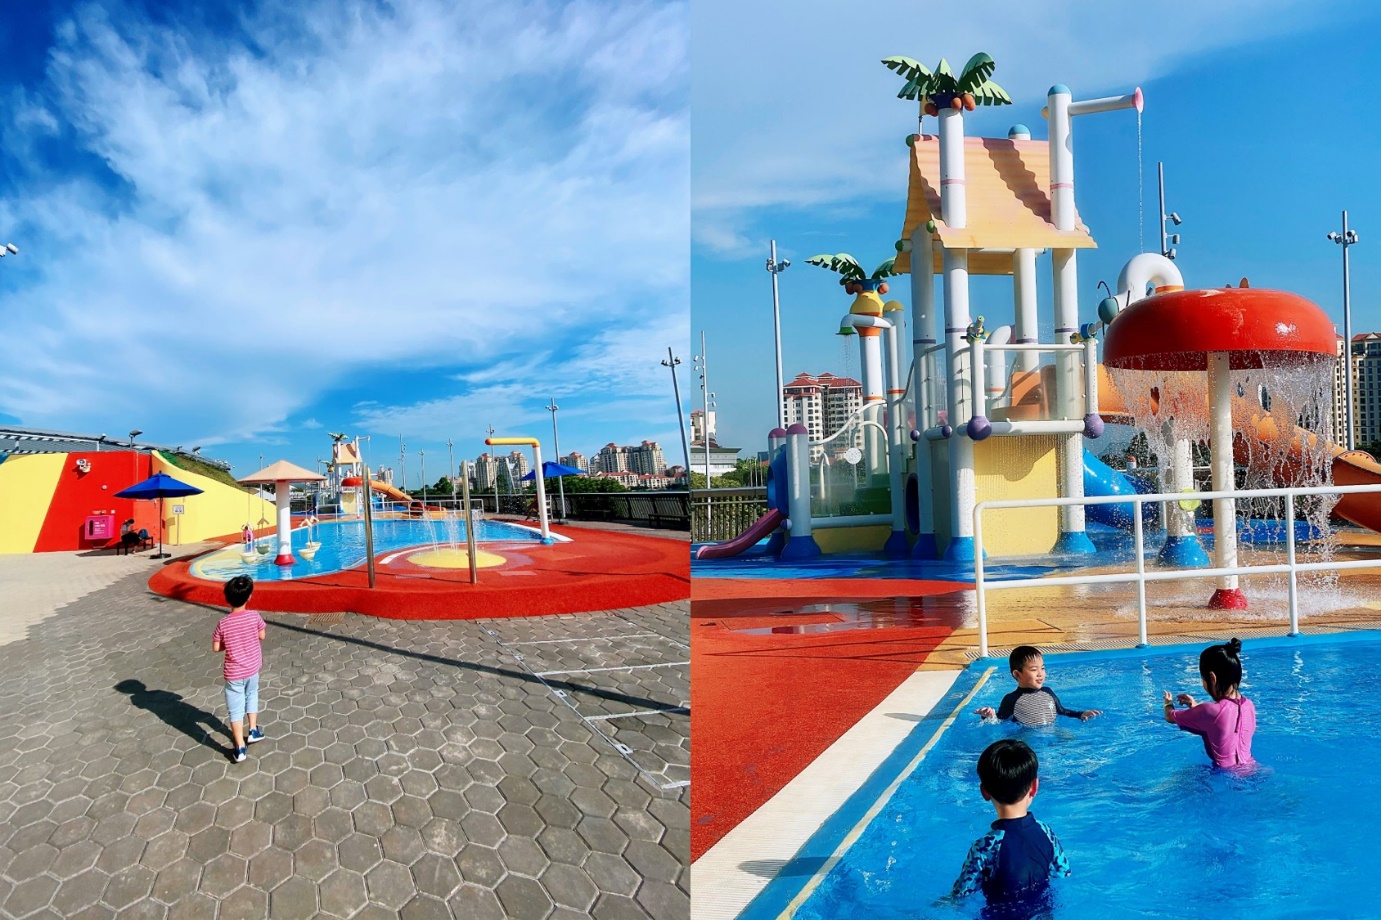 My son and I had a great experience pushing comfort limits at Splash-N-Surf, the Kids Water Playground at Singapore Sports Hub.